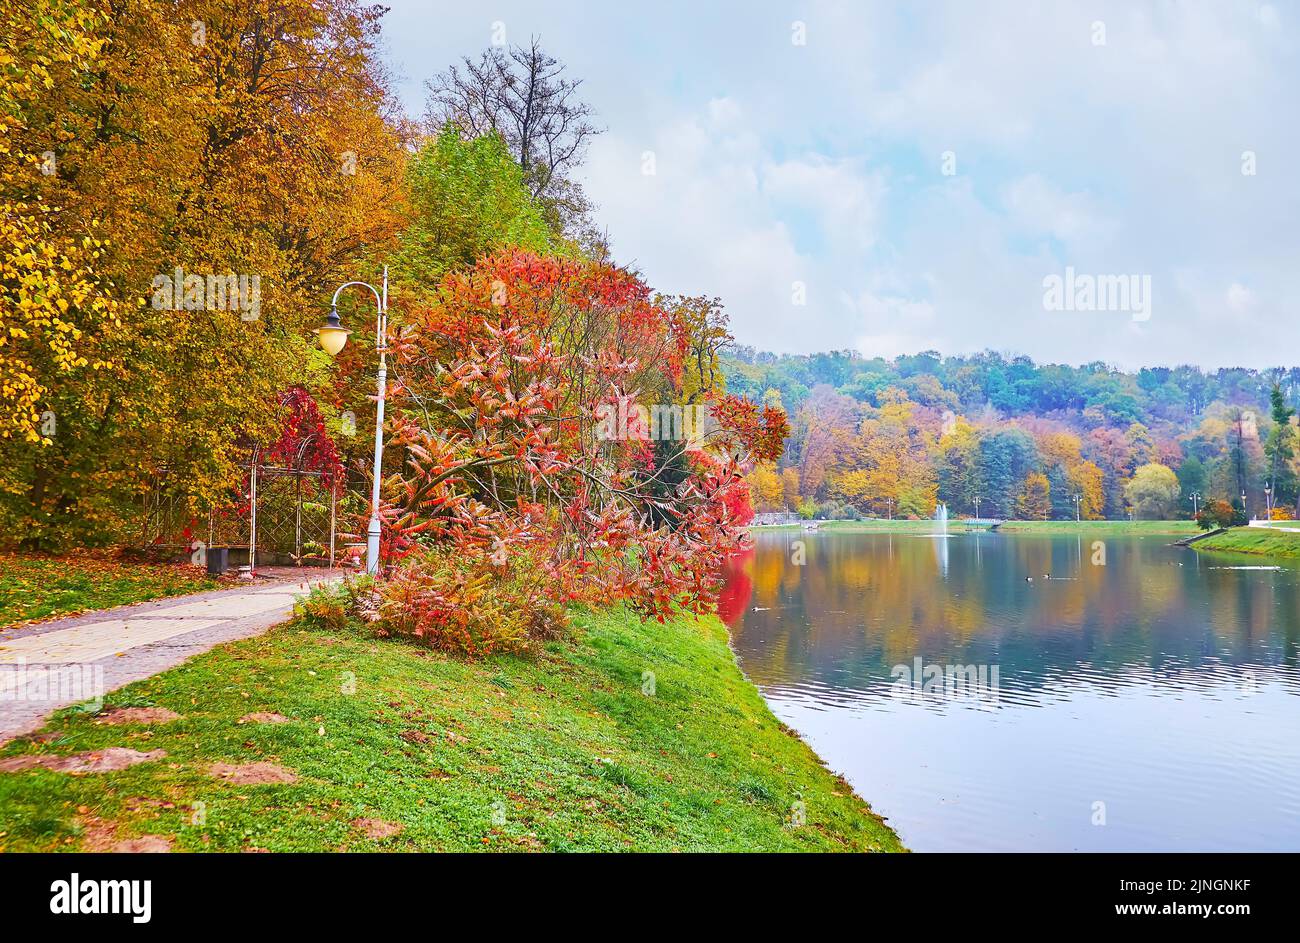 The bank of Palladin pond with a view on colored lindens, sumac trees, oaks and green lawn of Feofania park, Kyiv, Ukraine Stock Photo